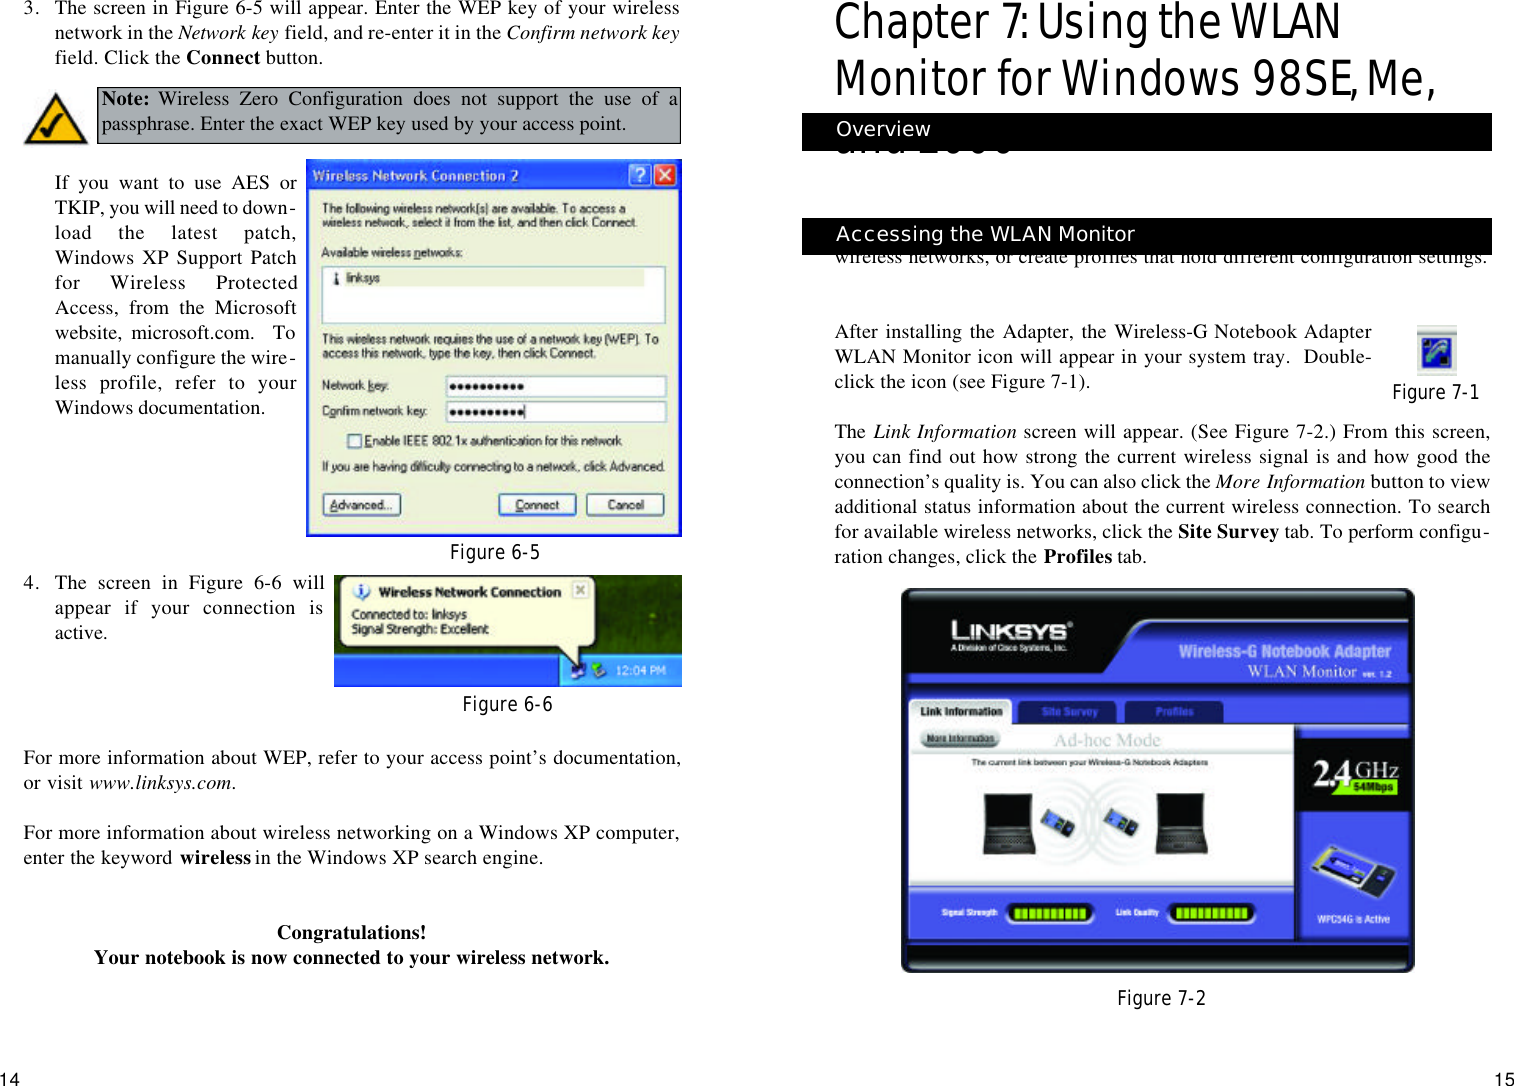 1514Chapter 7: Using the WLANMonitor for Windows 98SE, Me,and 2000Use the WLAN Monitor to check the link information, search for availablewireless networks, or create profiles that hold different configuration settings.After installing the Adapter, the Wireless-G Notebook AdapterWLAN Monitor icon will appear in your system tray.  Double-click the icon (see Figure 7-1).The  Link Information screen will appear. (See Figure 7-2.) From this screen,you can find out how strong the current wireless signal is and how good theconnection’s quality is. You can also click the More Information button to viewadditional status information about the current wireless connection. To searchfor available wireless networks, click the Site Survey tab. To perform configu-ration changes, click the Profiles tab.Figure 7-1Figure 7-2Accessing the WLAN MonitorOverview3. The screen in Figure 6-5 will appear. Enter the WEP key of your wirelessnetwork in the Network key field, and re-enter it in the Confirm network keyfield. Click the Connect button.If you want to use AES orTKIP, you will need to down-load the latest patch,Windows XP Support Patchfor Wireless ProtectedAccess, from the Microsoftwebsite, microsoft.com.  Tomanually configure the wire-less profile, refer to yourWindows documentation.4. The screen in Figure 6-6 willappear if your connection isactive.For more information about WEP, refer to your access point’s documentation,or visit www.linksys.com.For more information about wireless networking on a Windows XP computer,enter the keyword wirelessin the Windows XP search engine.Congratulations!Your notebook is now connected to your wireless network.Figure 6-5Note: Wireless Zero Configuration does not support the use of apassphrase. Enter the exact WEP key used by your access point.Figure 6-6